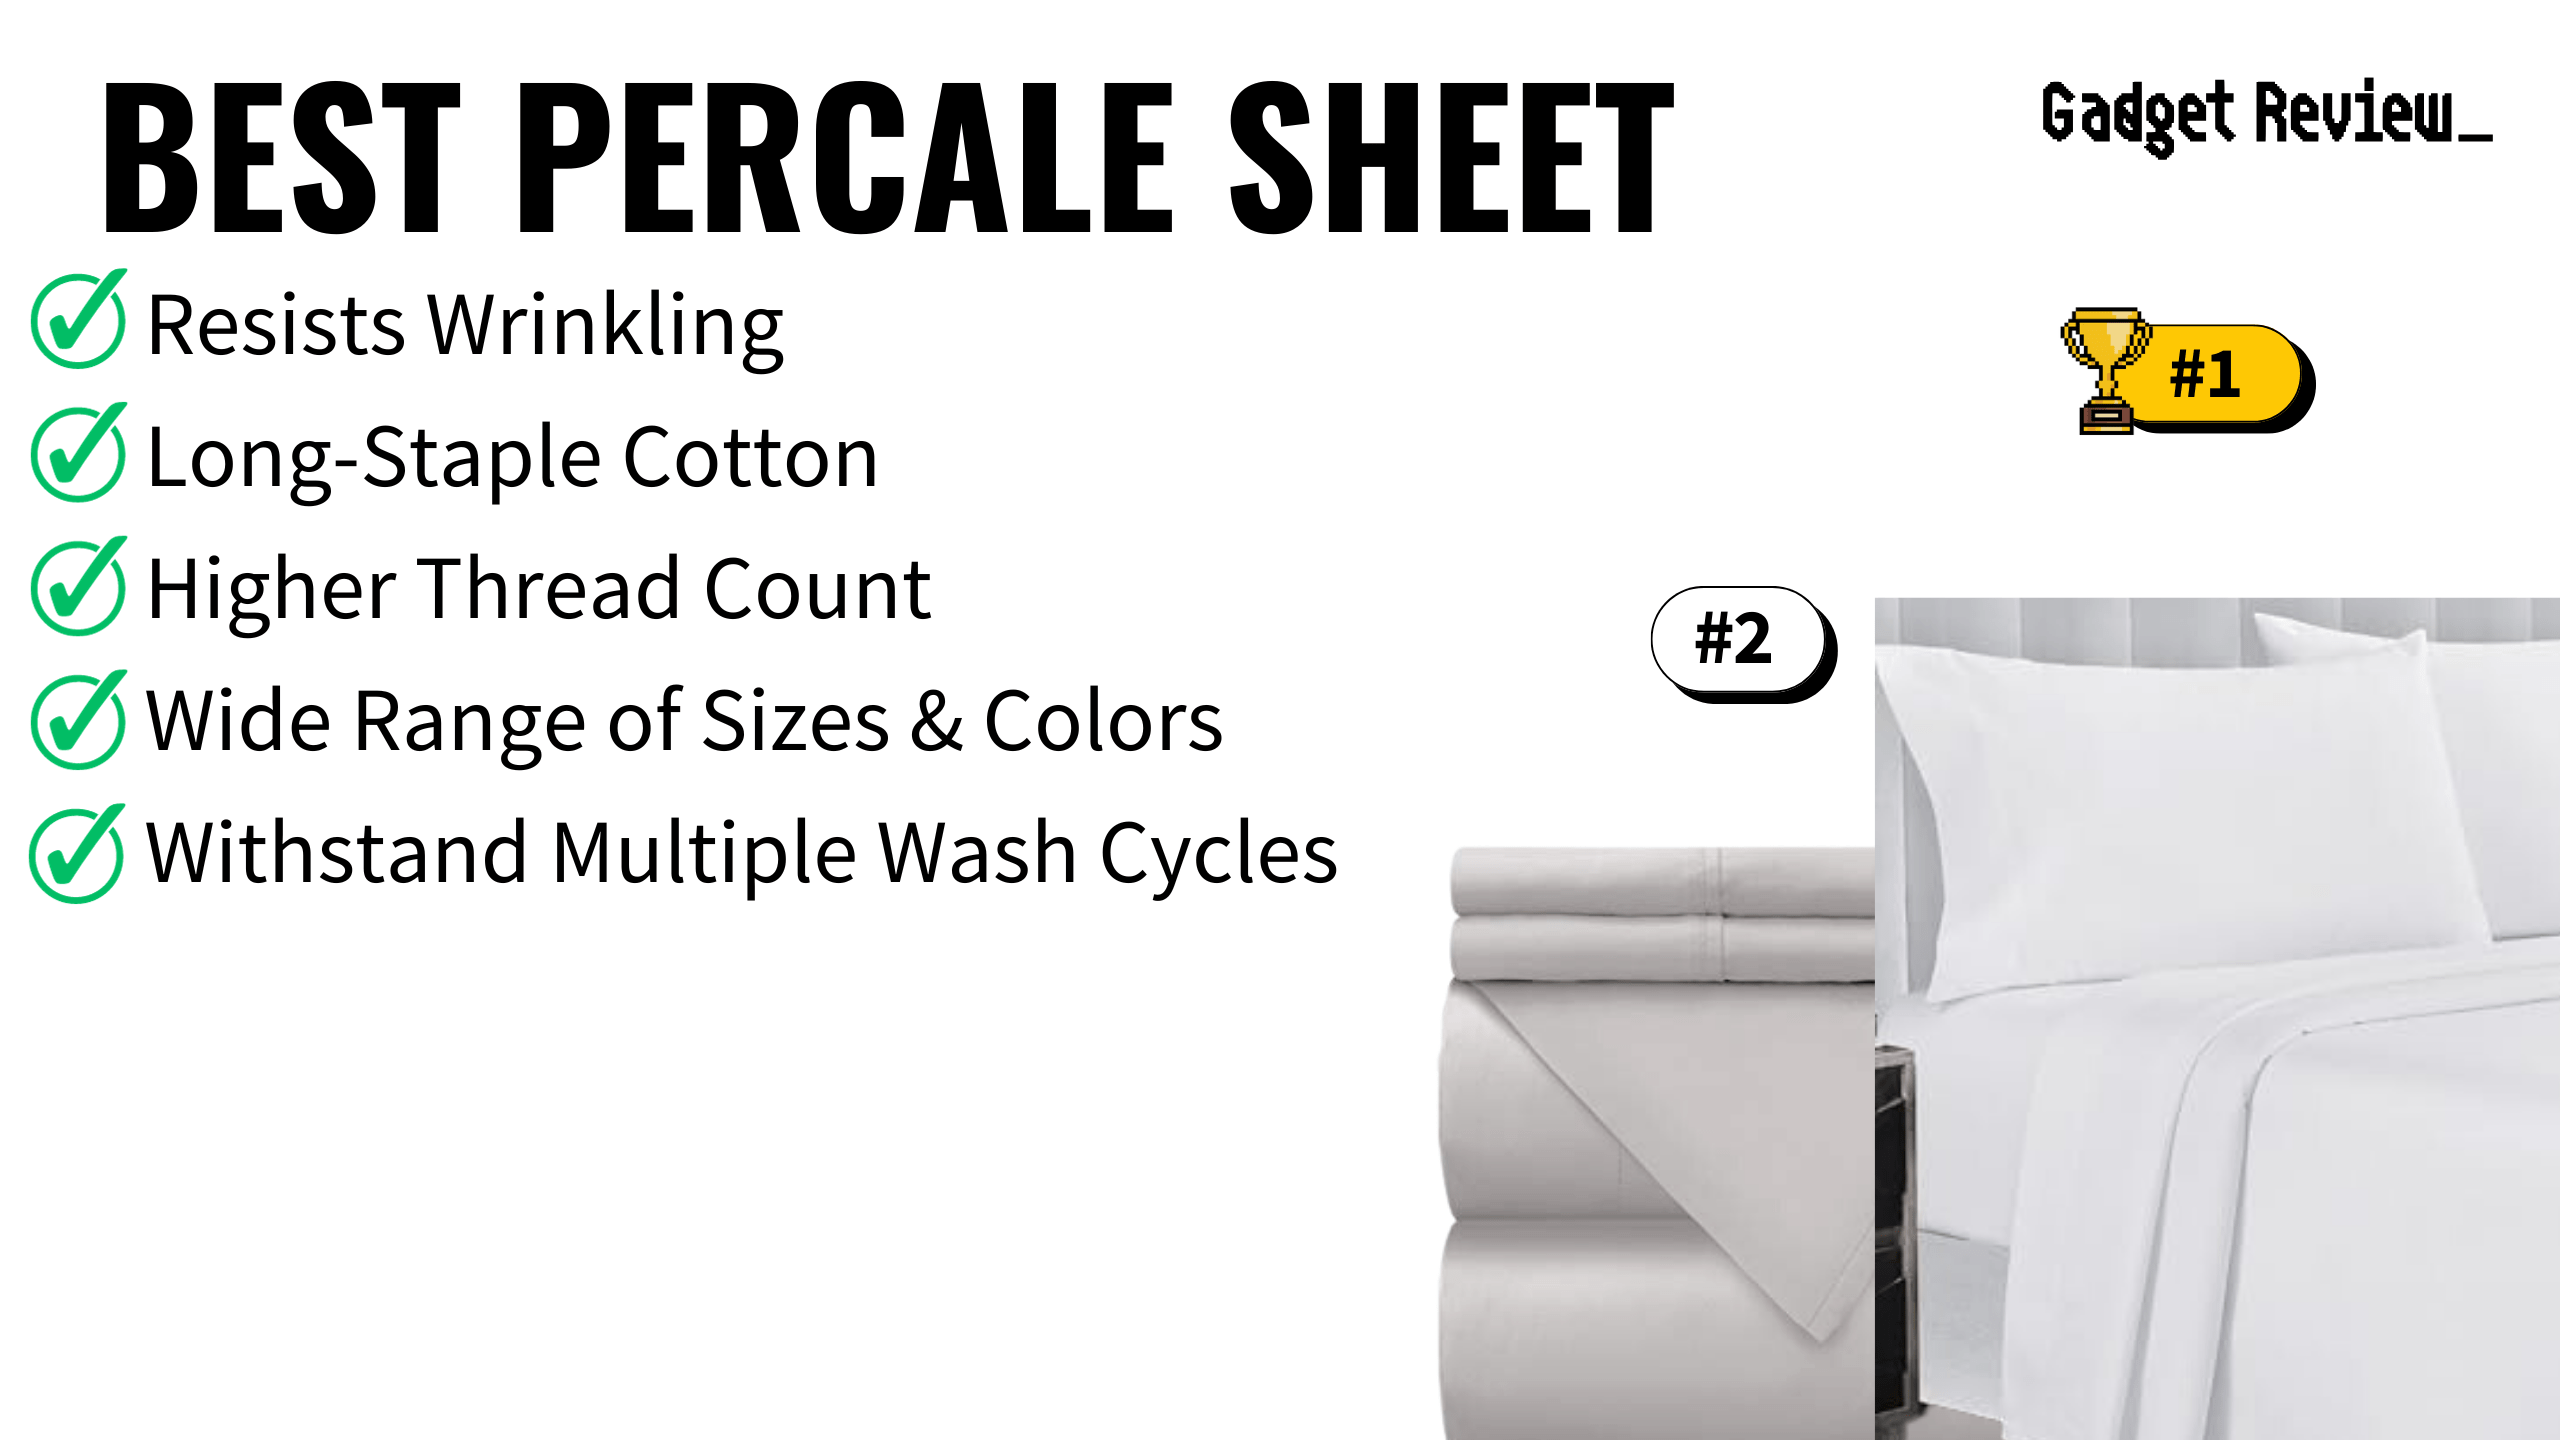 Best Percale Sheet